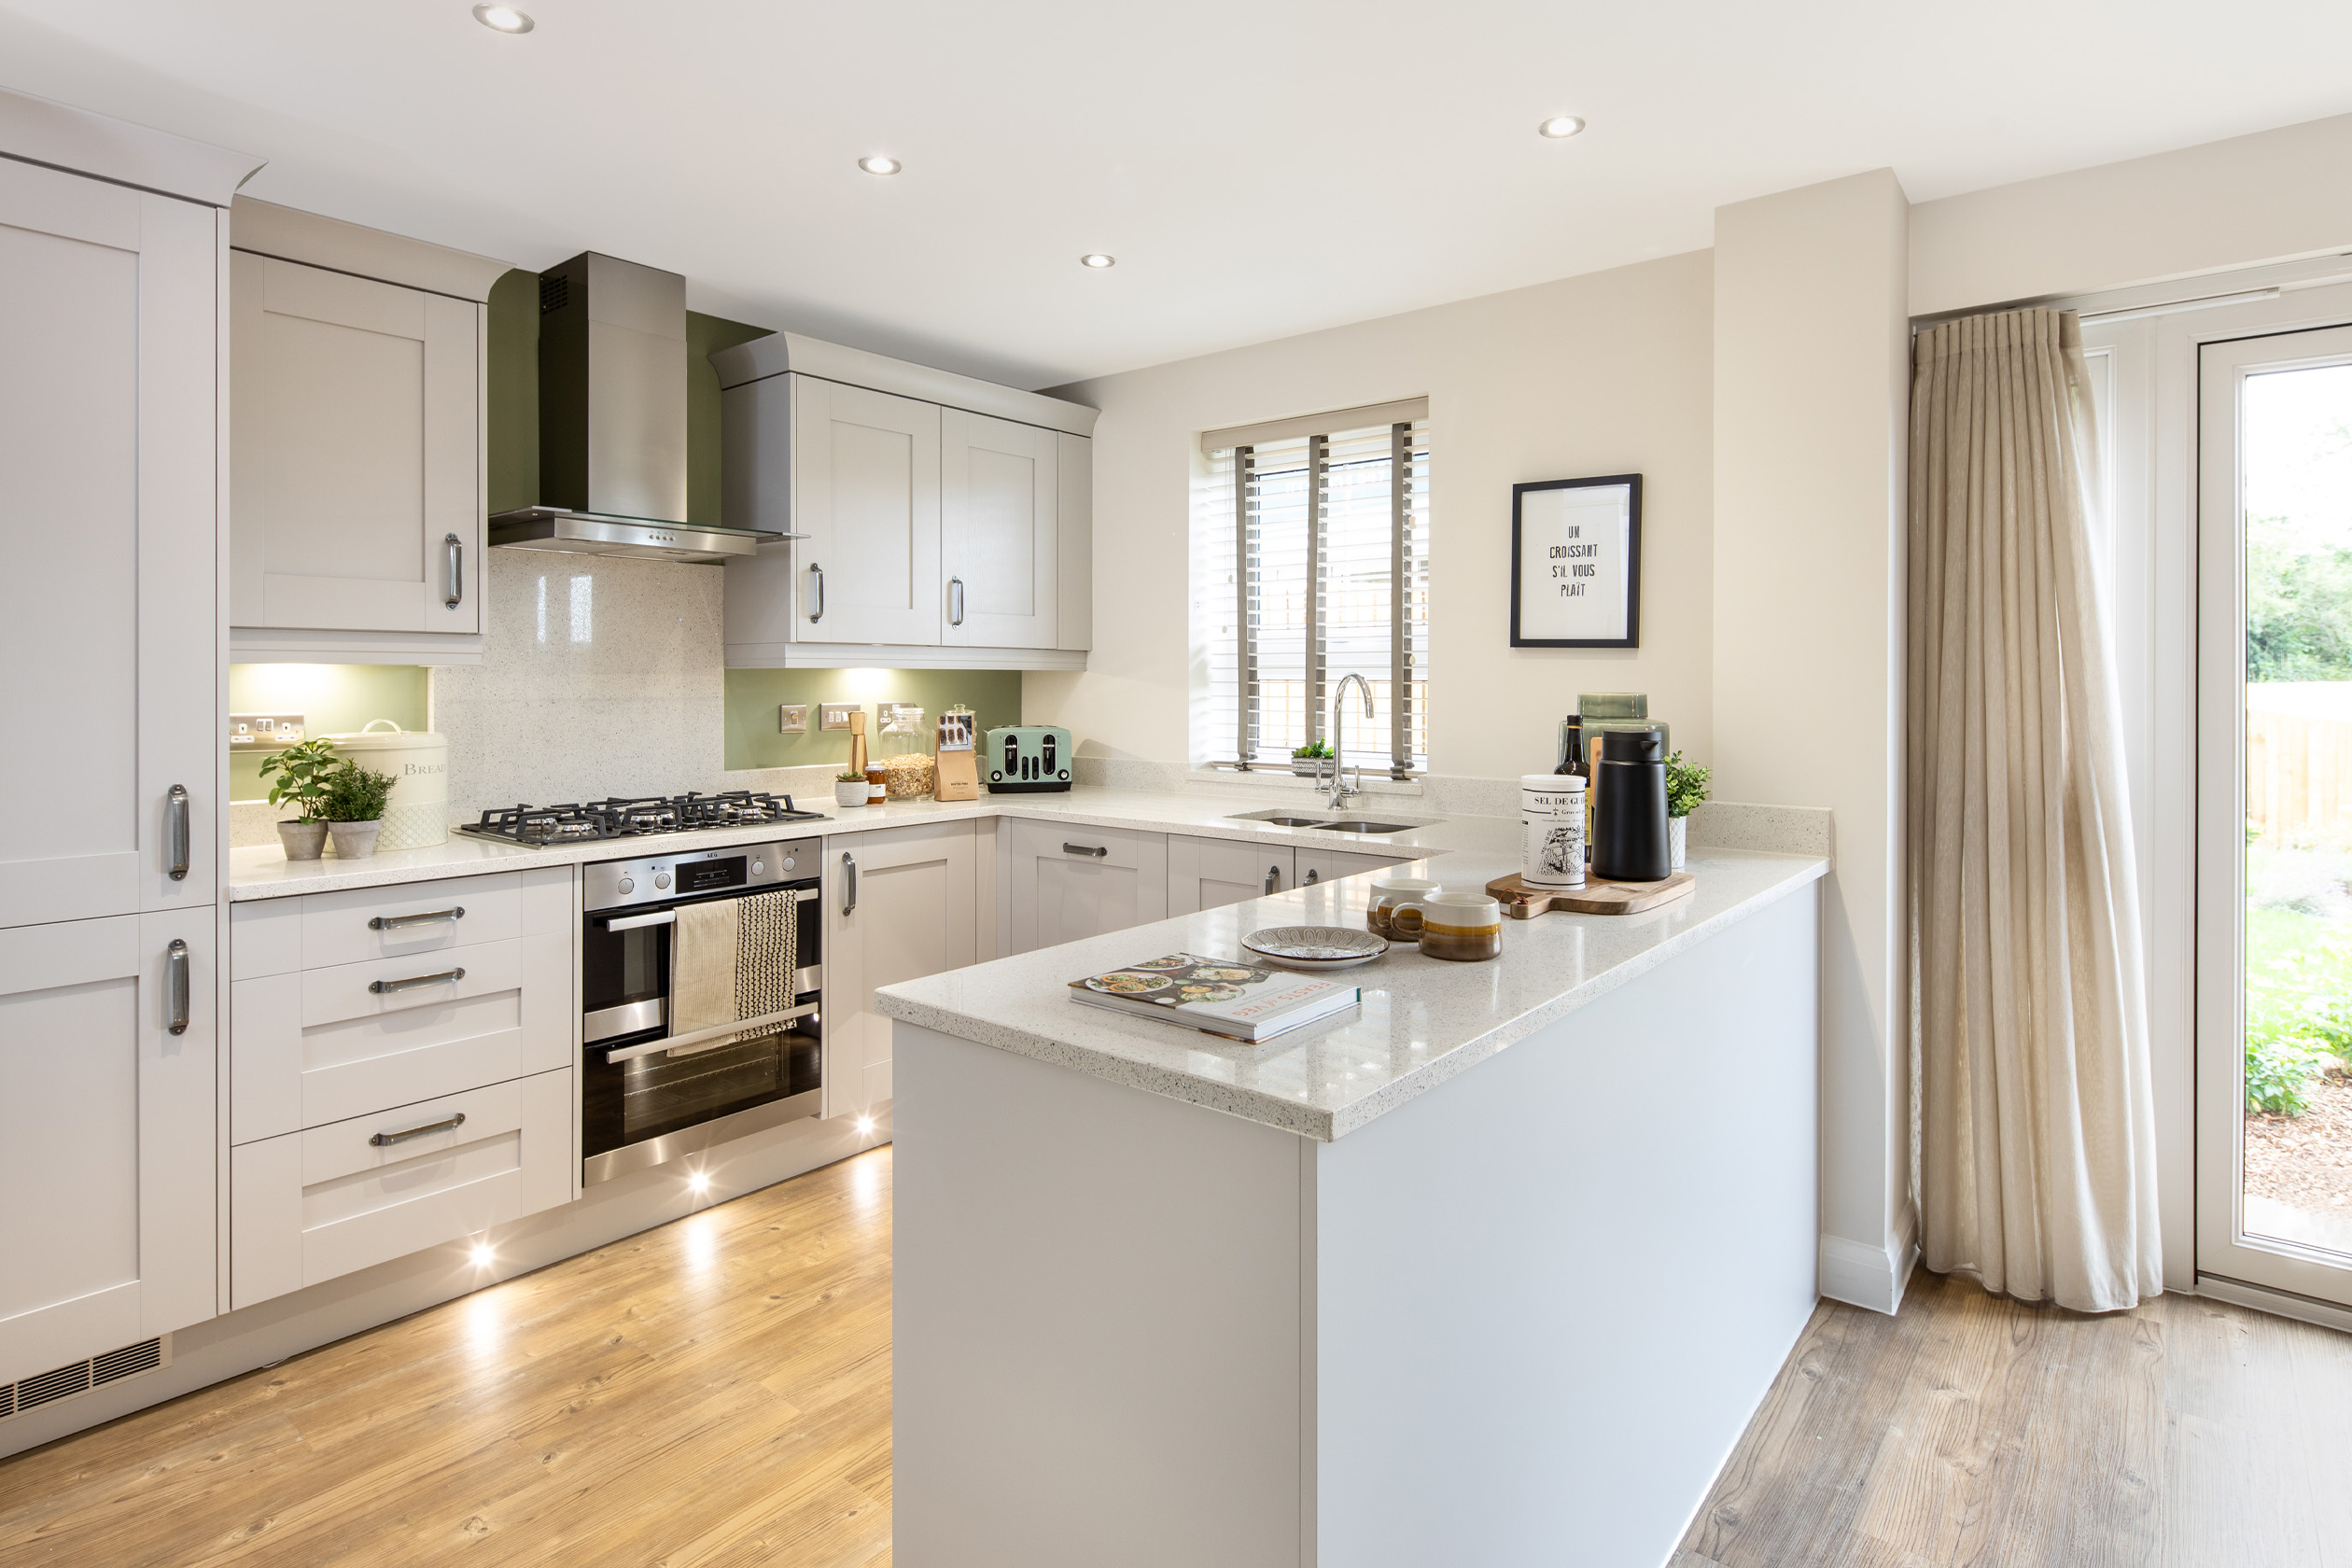 Property 2 of 9. Open Plan Kitchen In The Radleigh 4 Bedroom Home